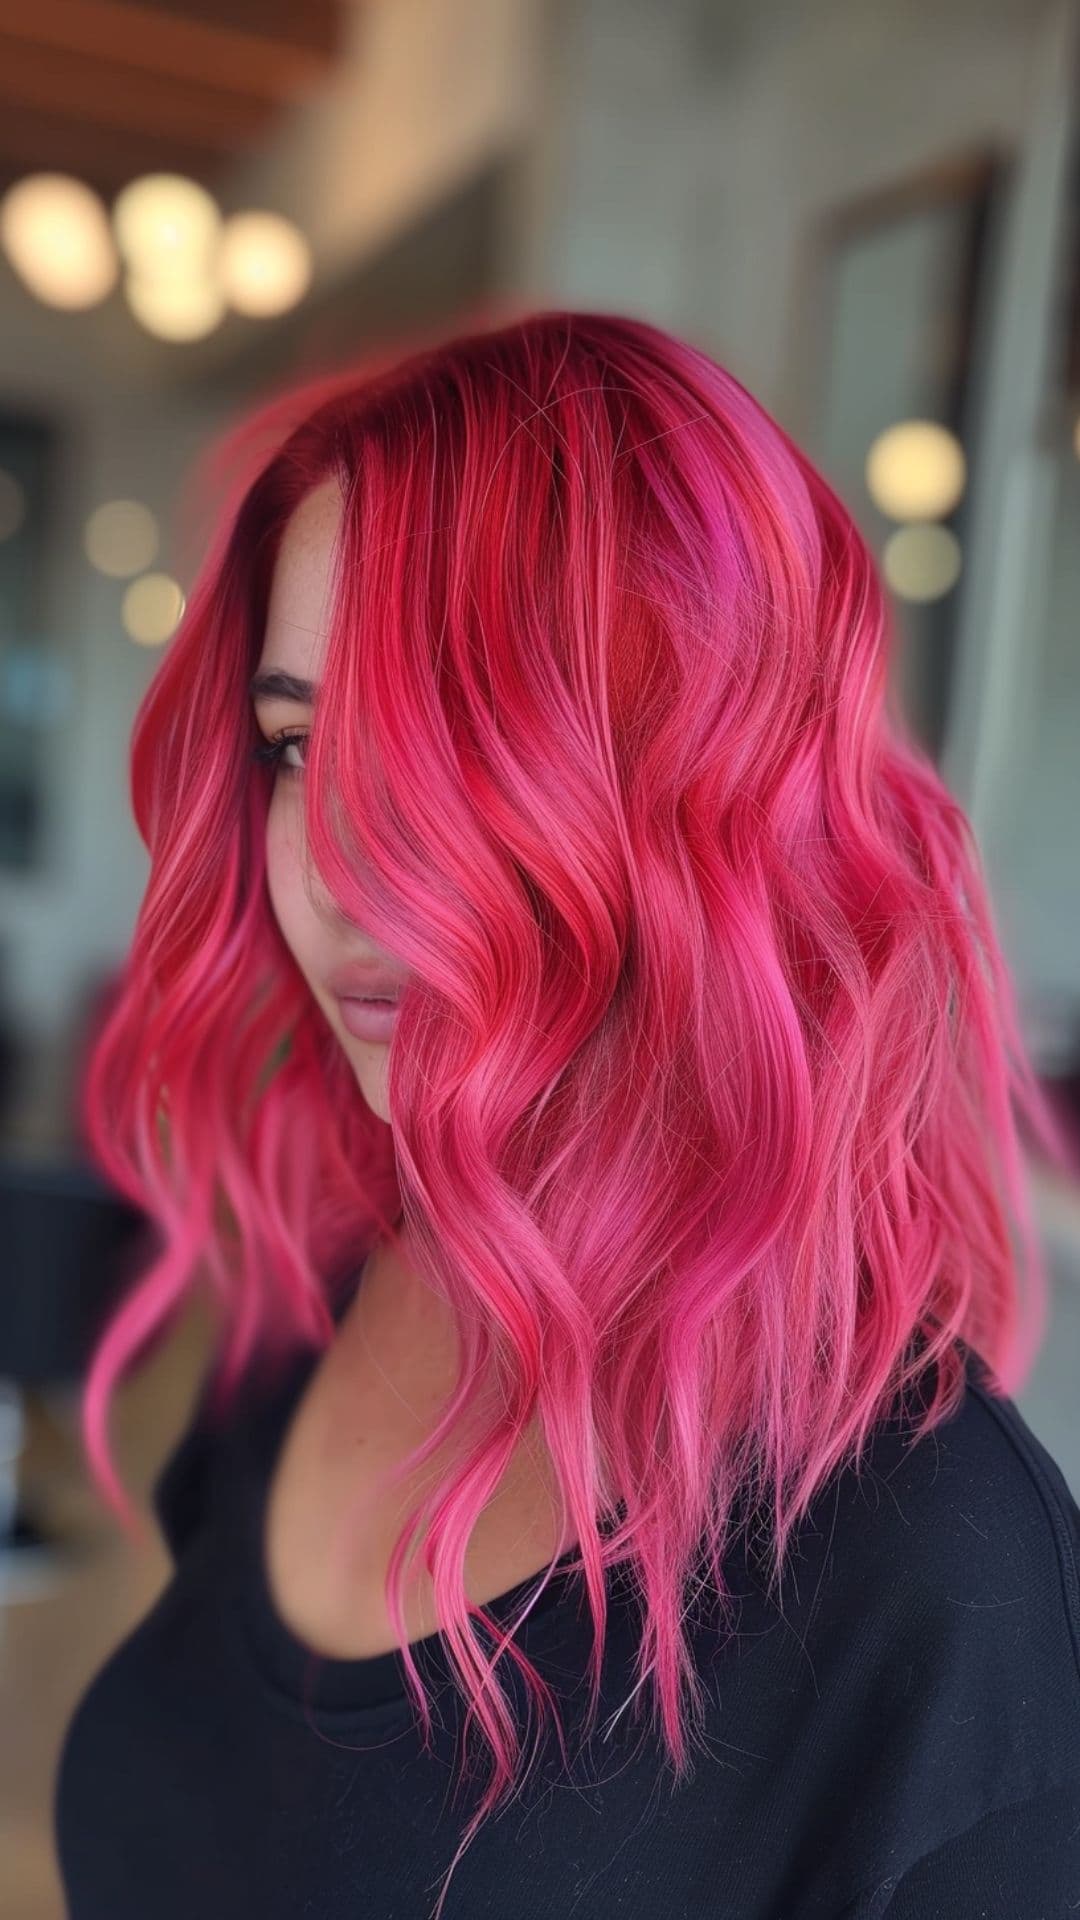 A woman modelling a red to bright pink ombre hair.